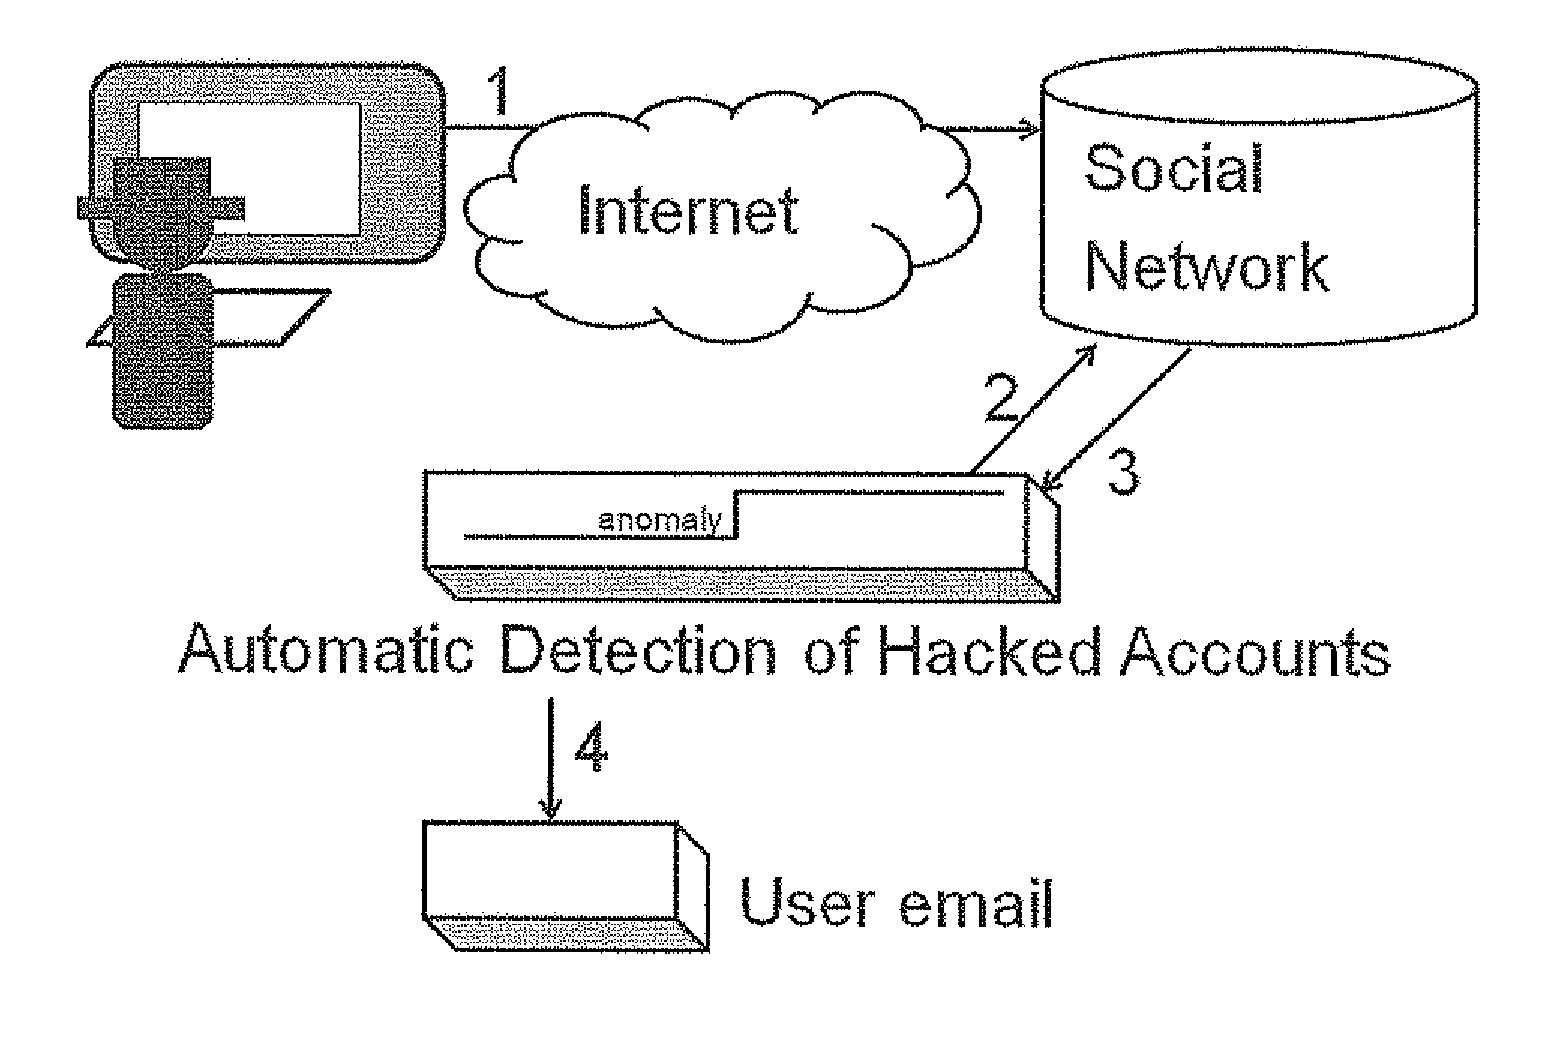 Detection of account hijacking in a social network